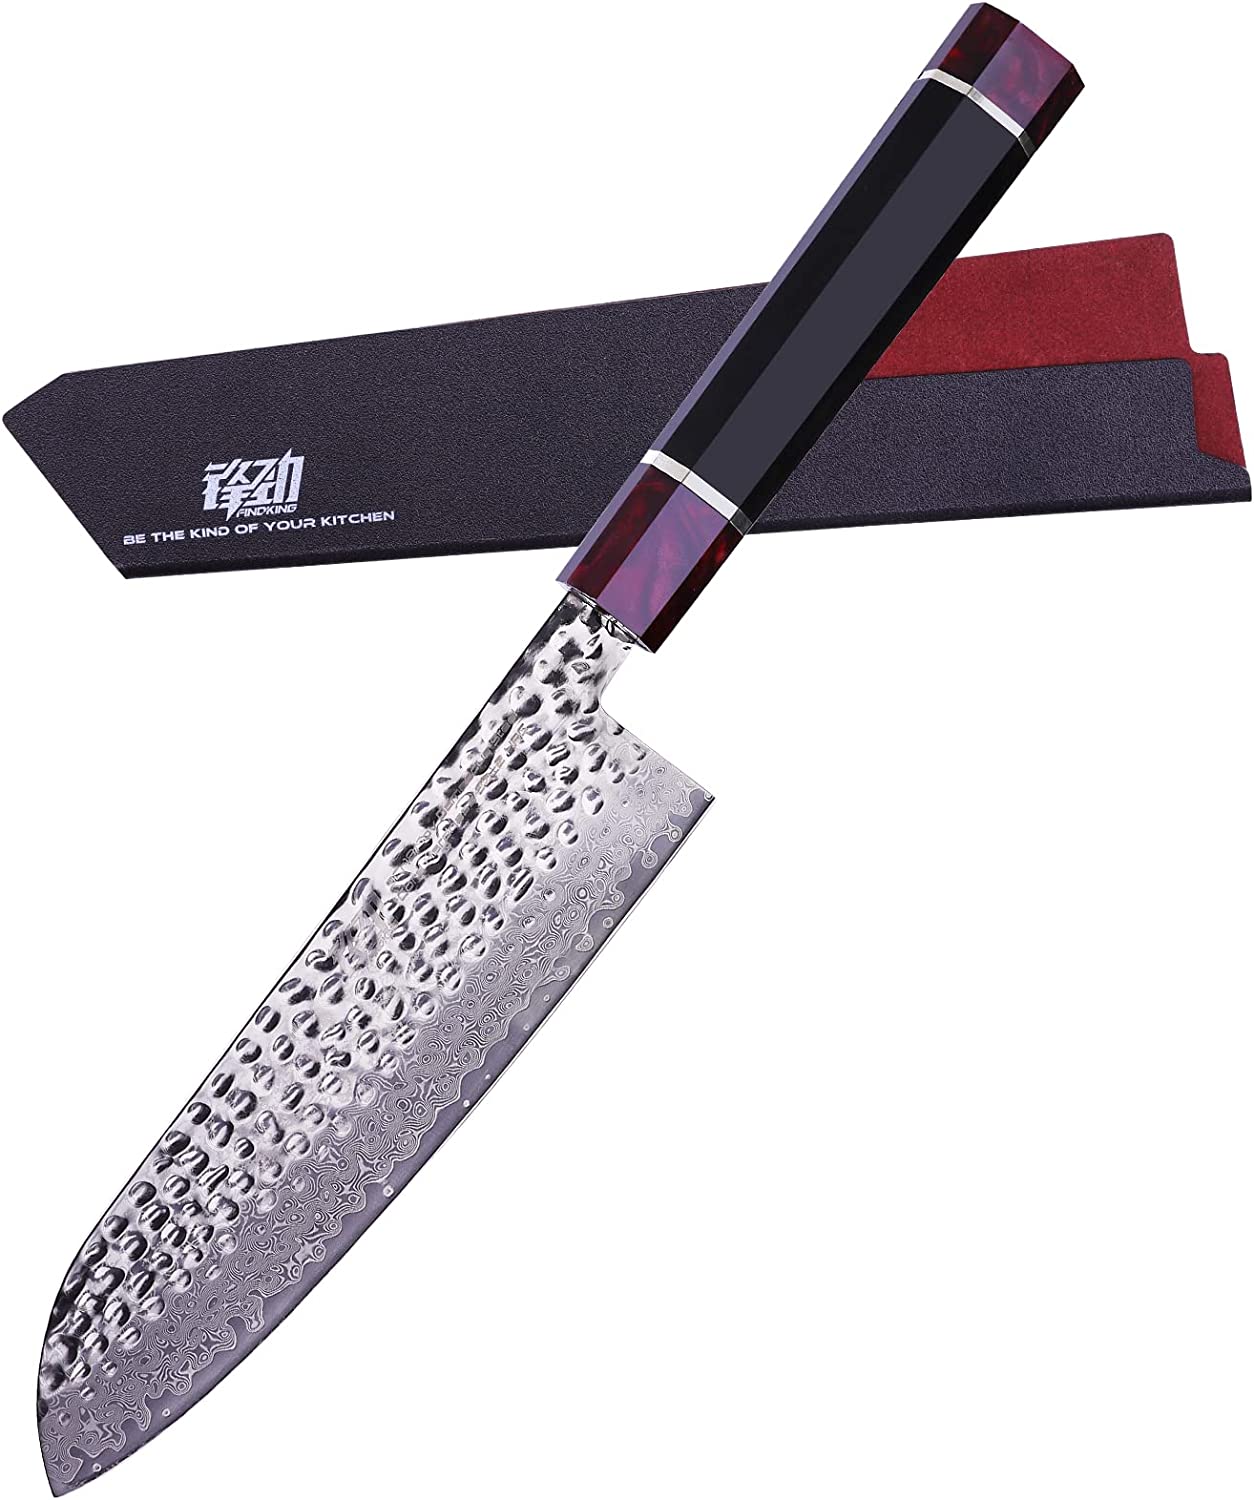 FINDKING Eternity Series Japanese Santoku Knife with ABS sheath, Professional Kitchen Knife, 9Cr18MoV Damascus Steel Blade, Resin Octagonal Handle, for Meat, Fruits, Vegetables, 7 Inches